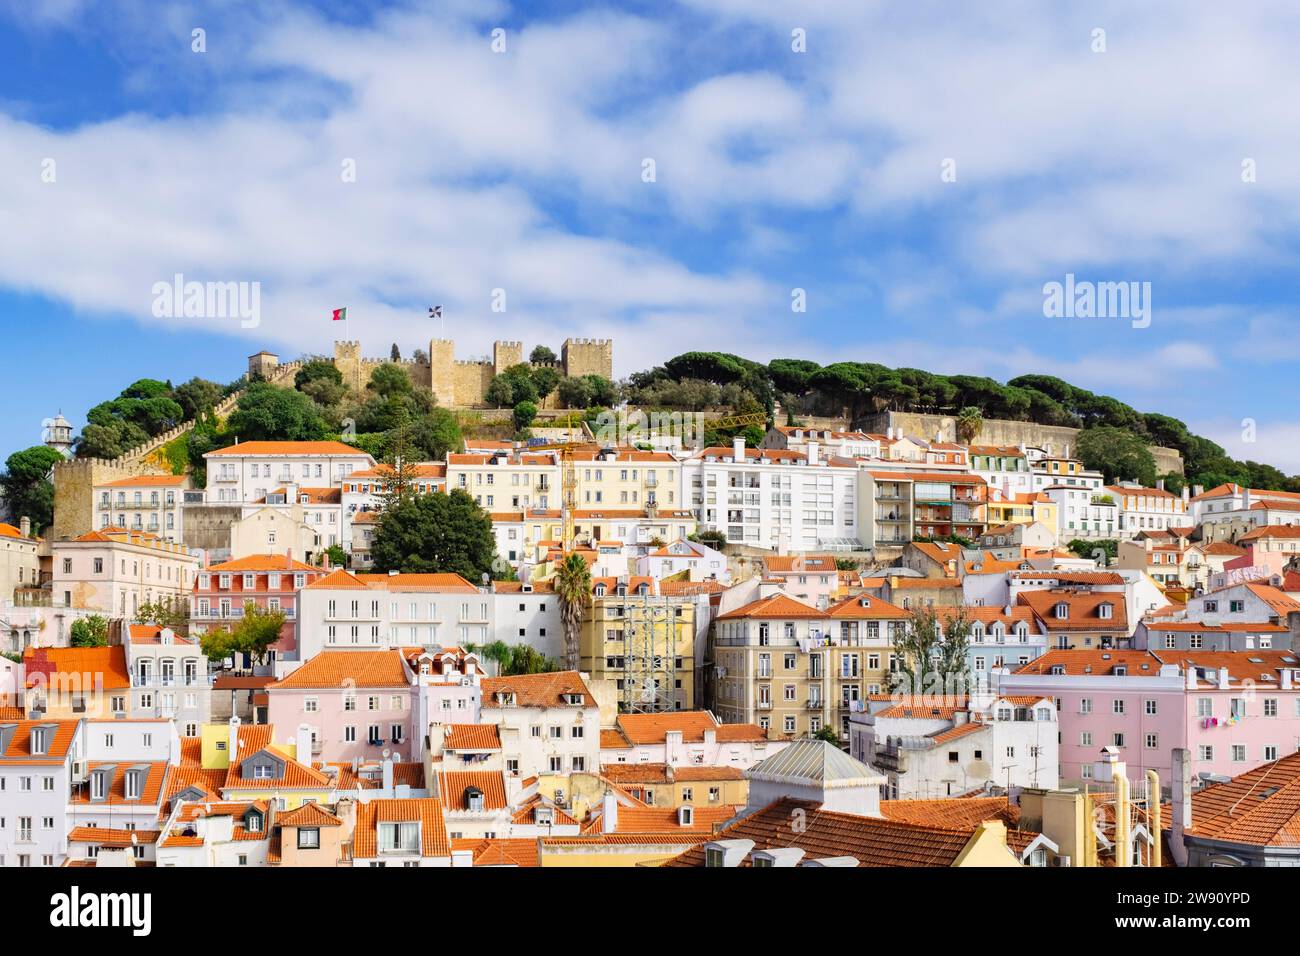 View across red rooftops of old houses towards Sao Jorge Castle on the hilltop. Lisbon, Portugal, Europe. Stock Photo